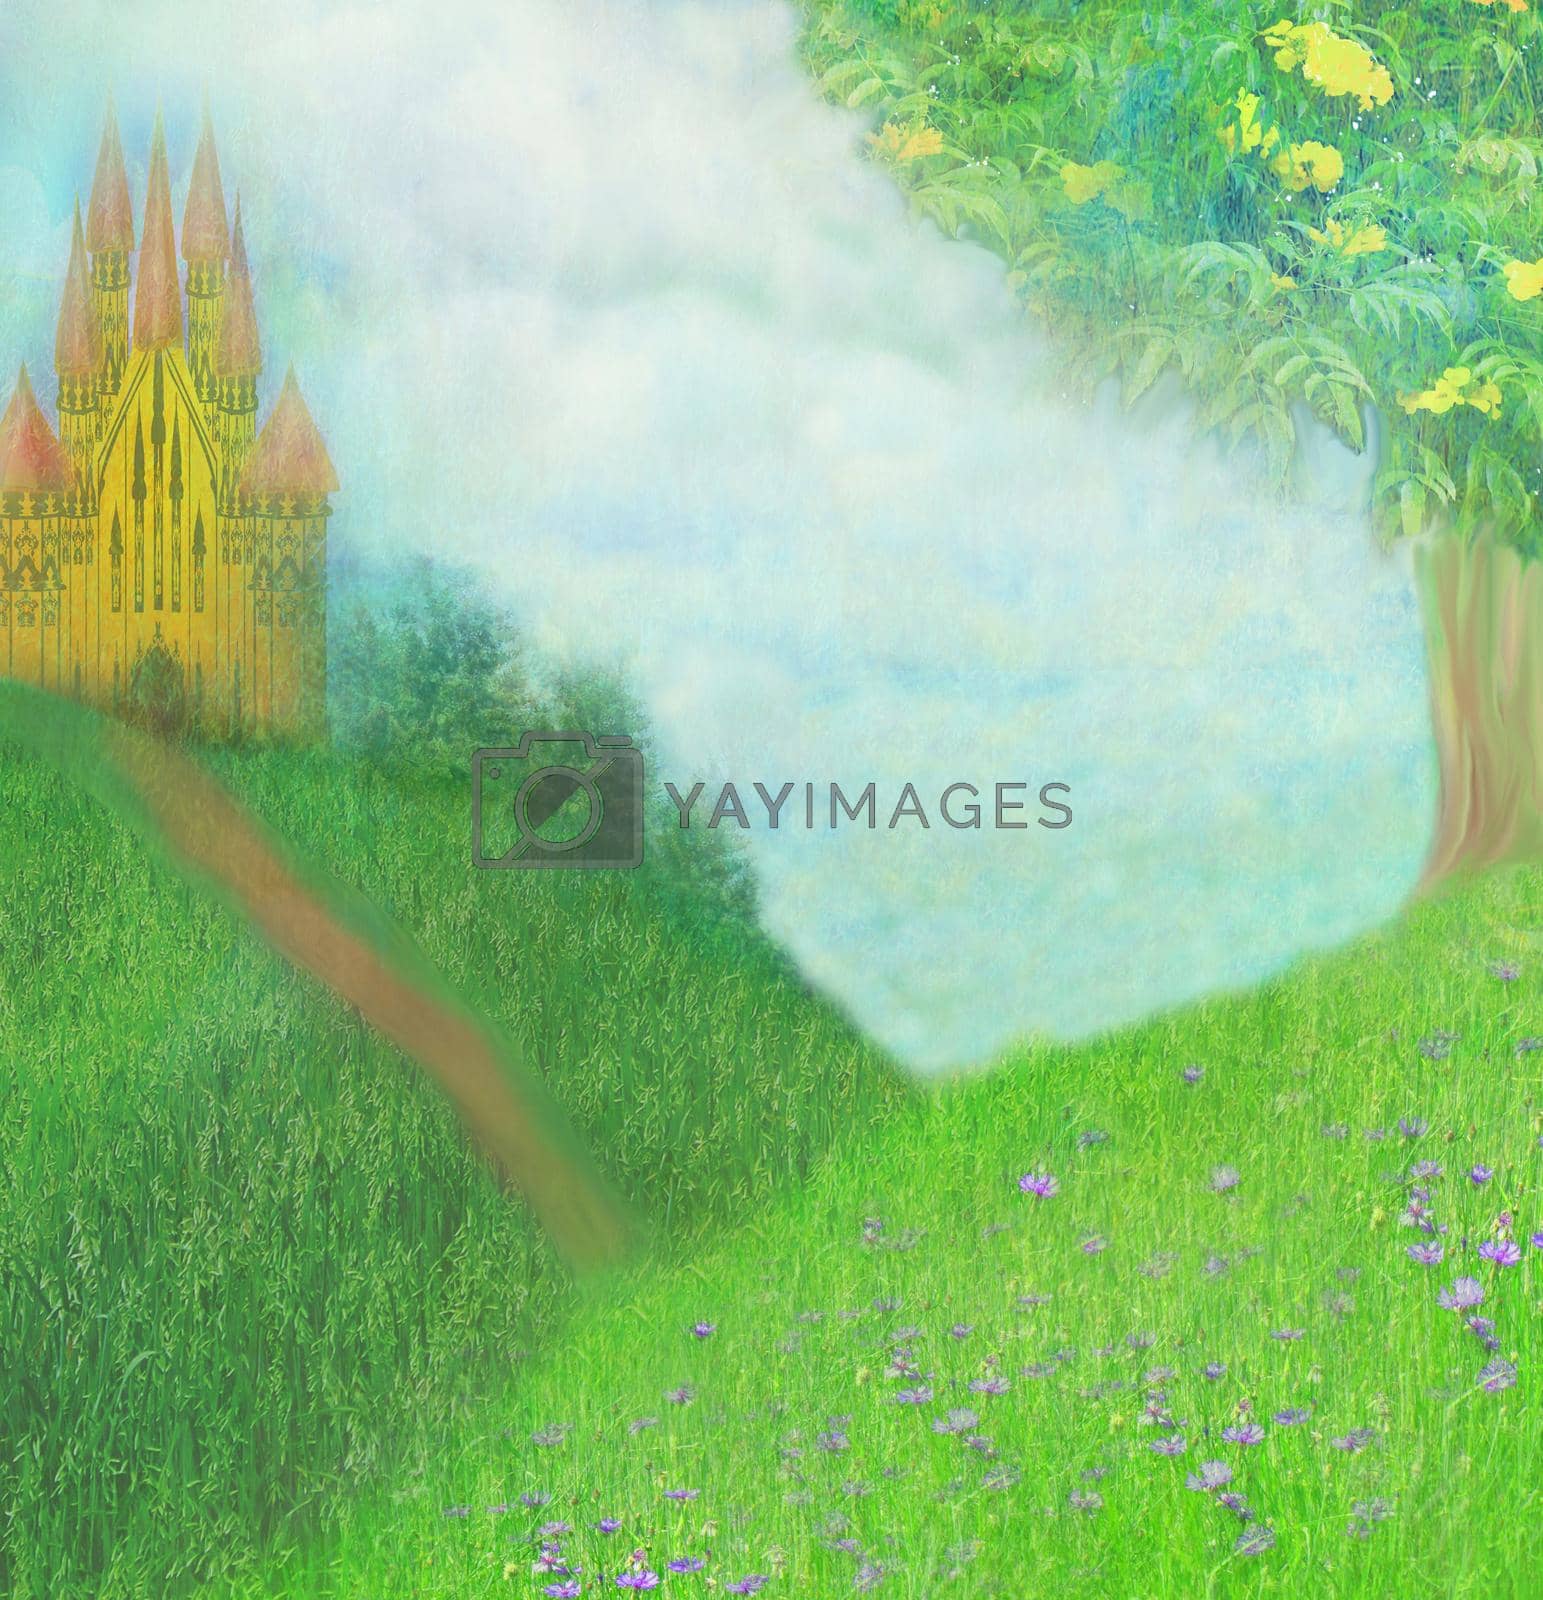 Royalty free image of Fantasy meadow with a fairytale tower  by JackyBrown